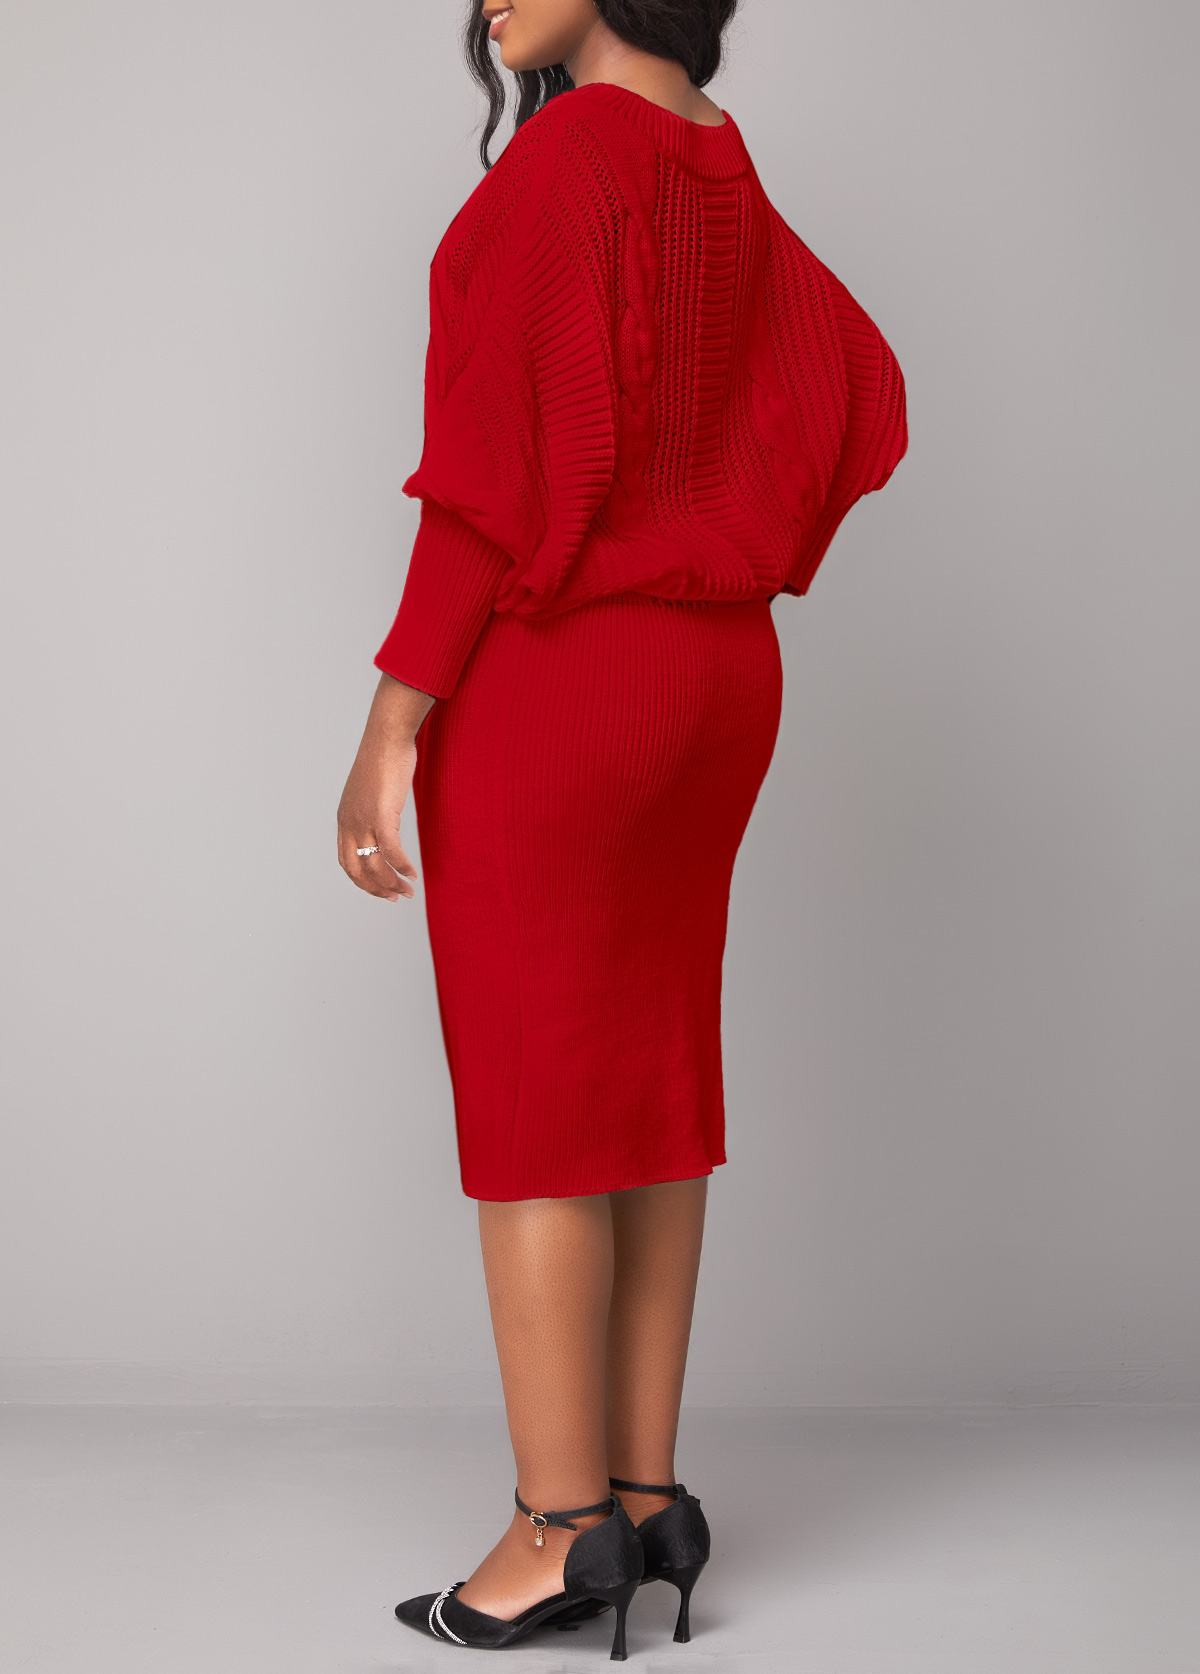 Boat Neck Red Long Sleeve Bodycon Dress